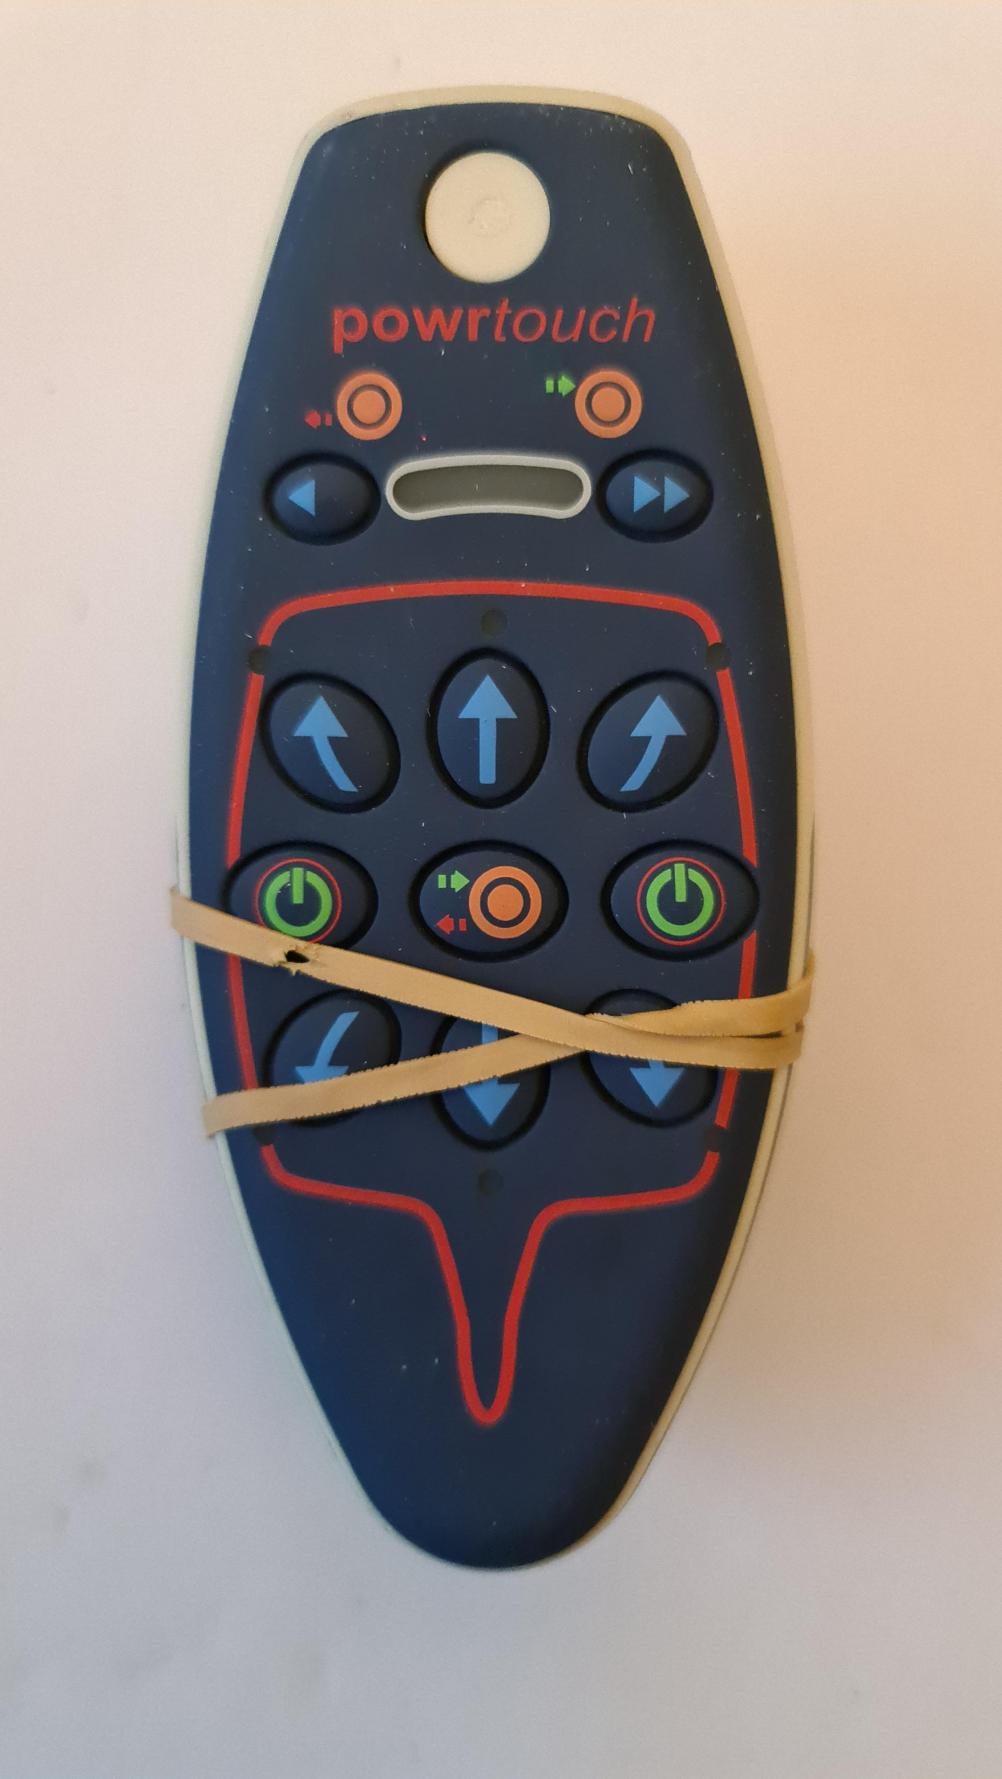 Powertouch  Remote Control - Front Image